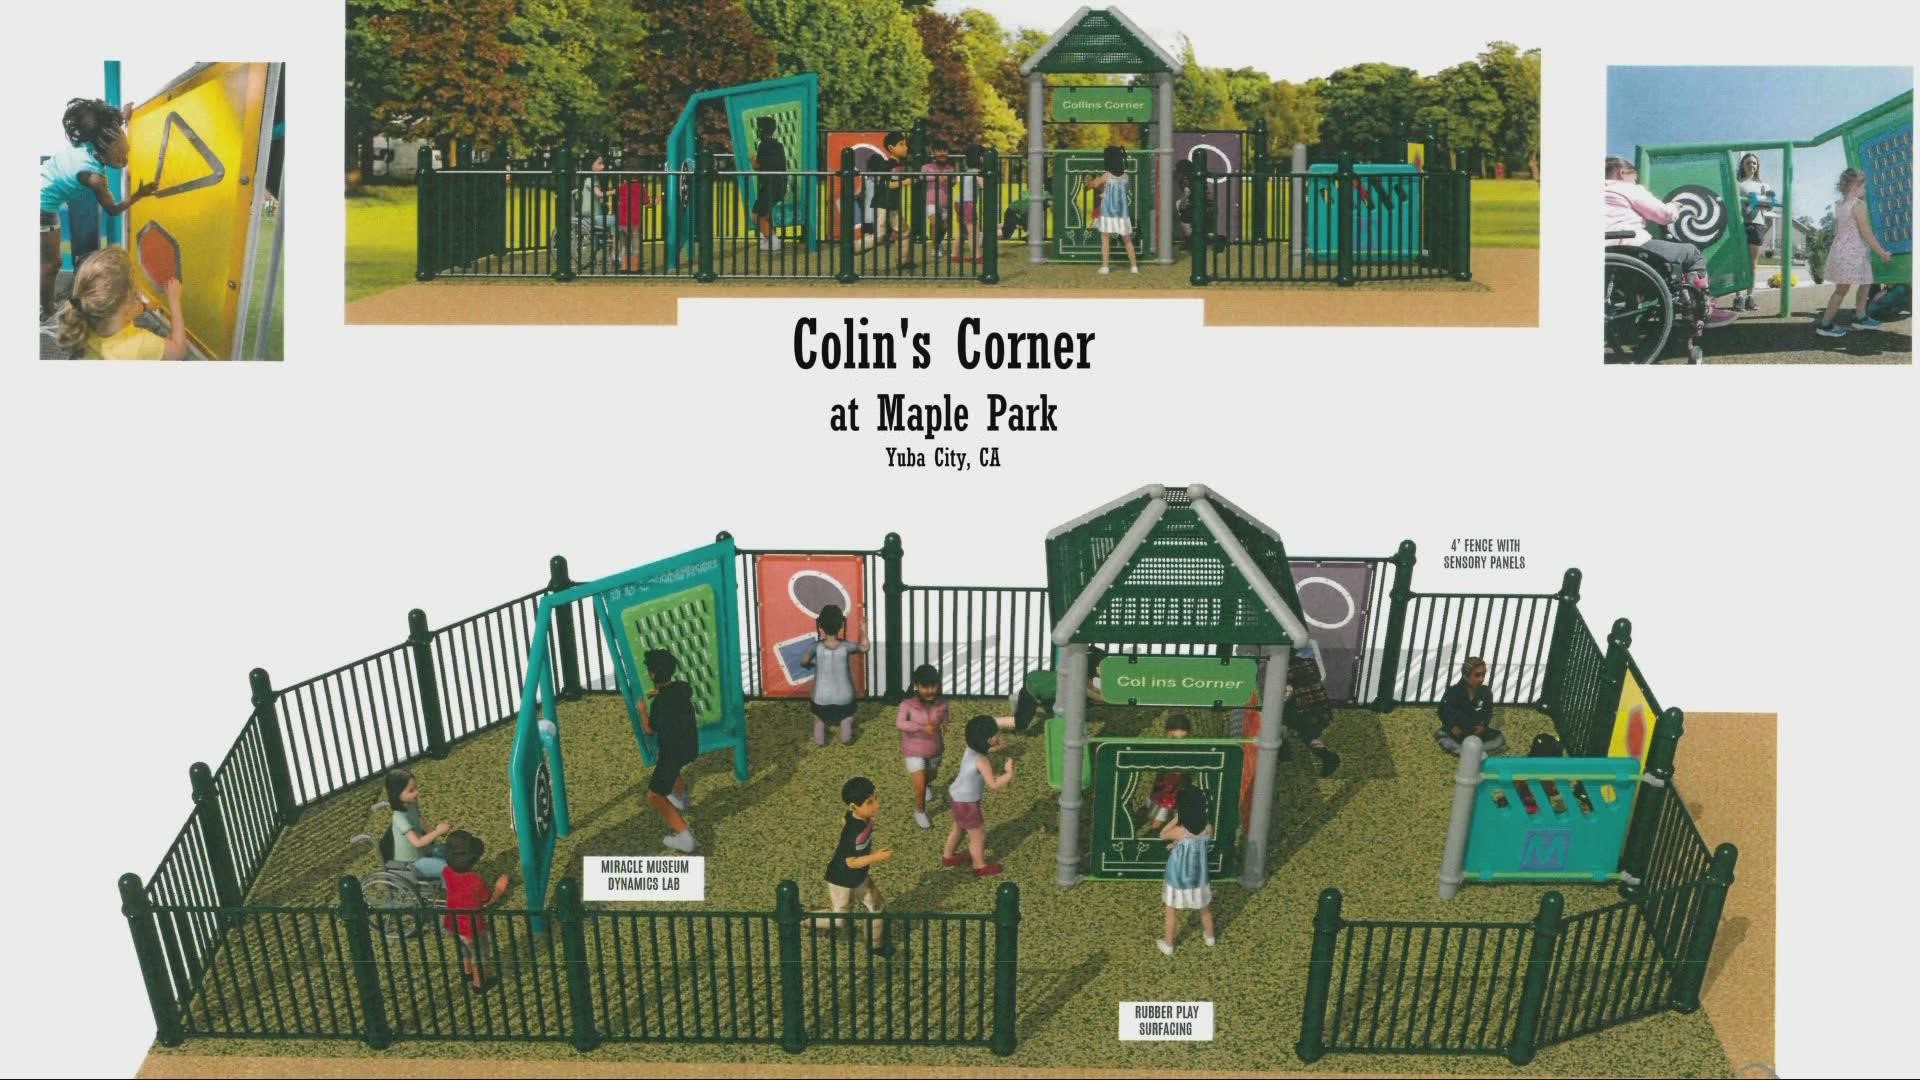 Colin's Corner at Maple Park in Yuba City will honor a 4-year-old boy who died of cancer earlier this year.